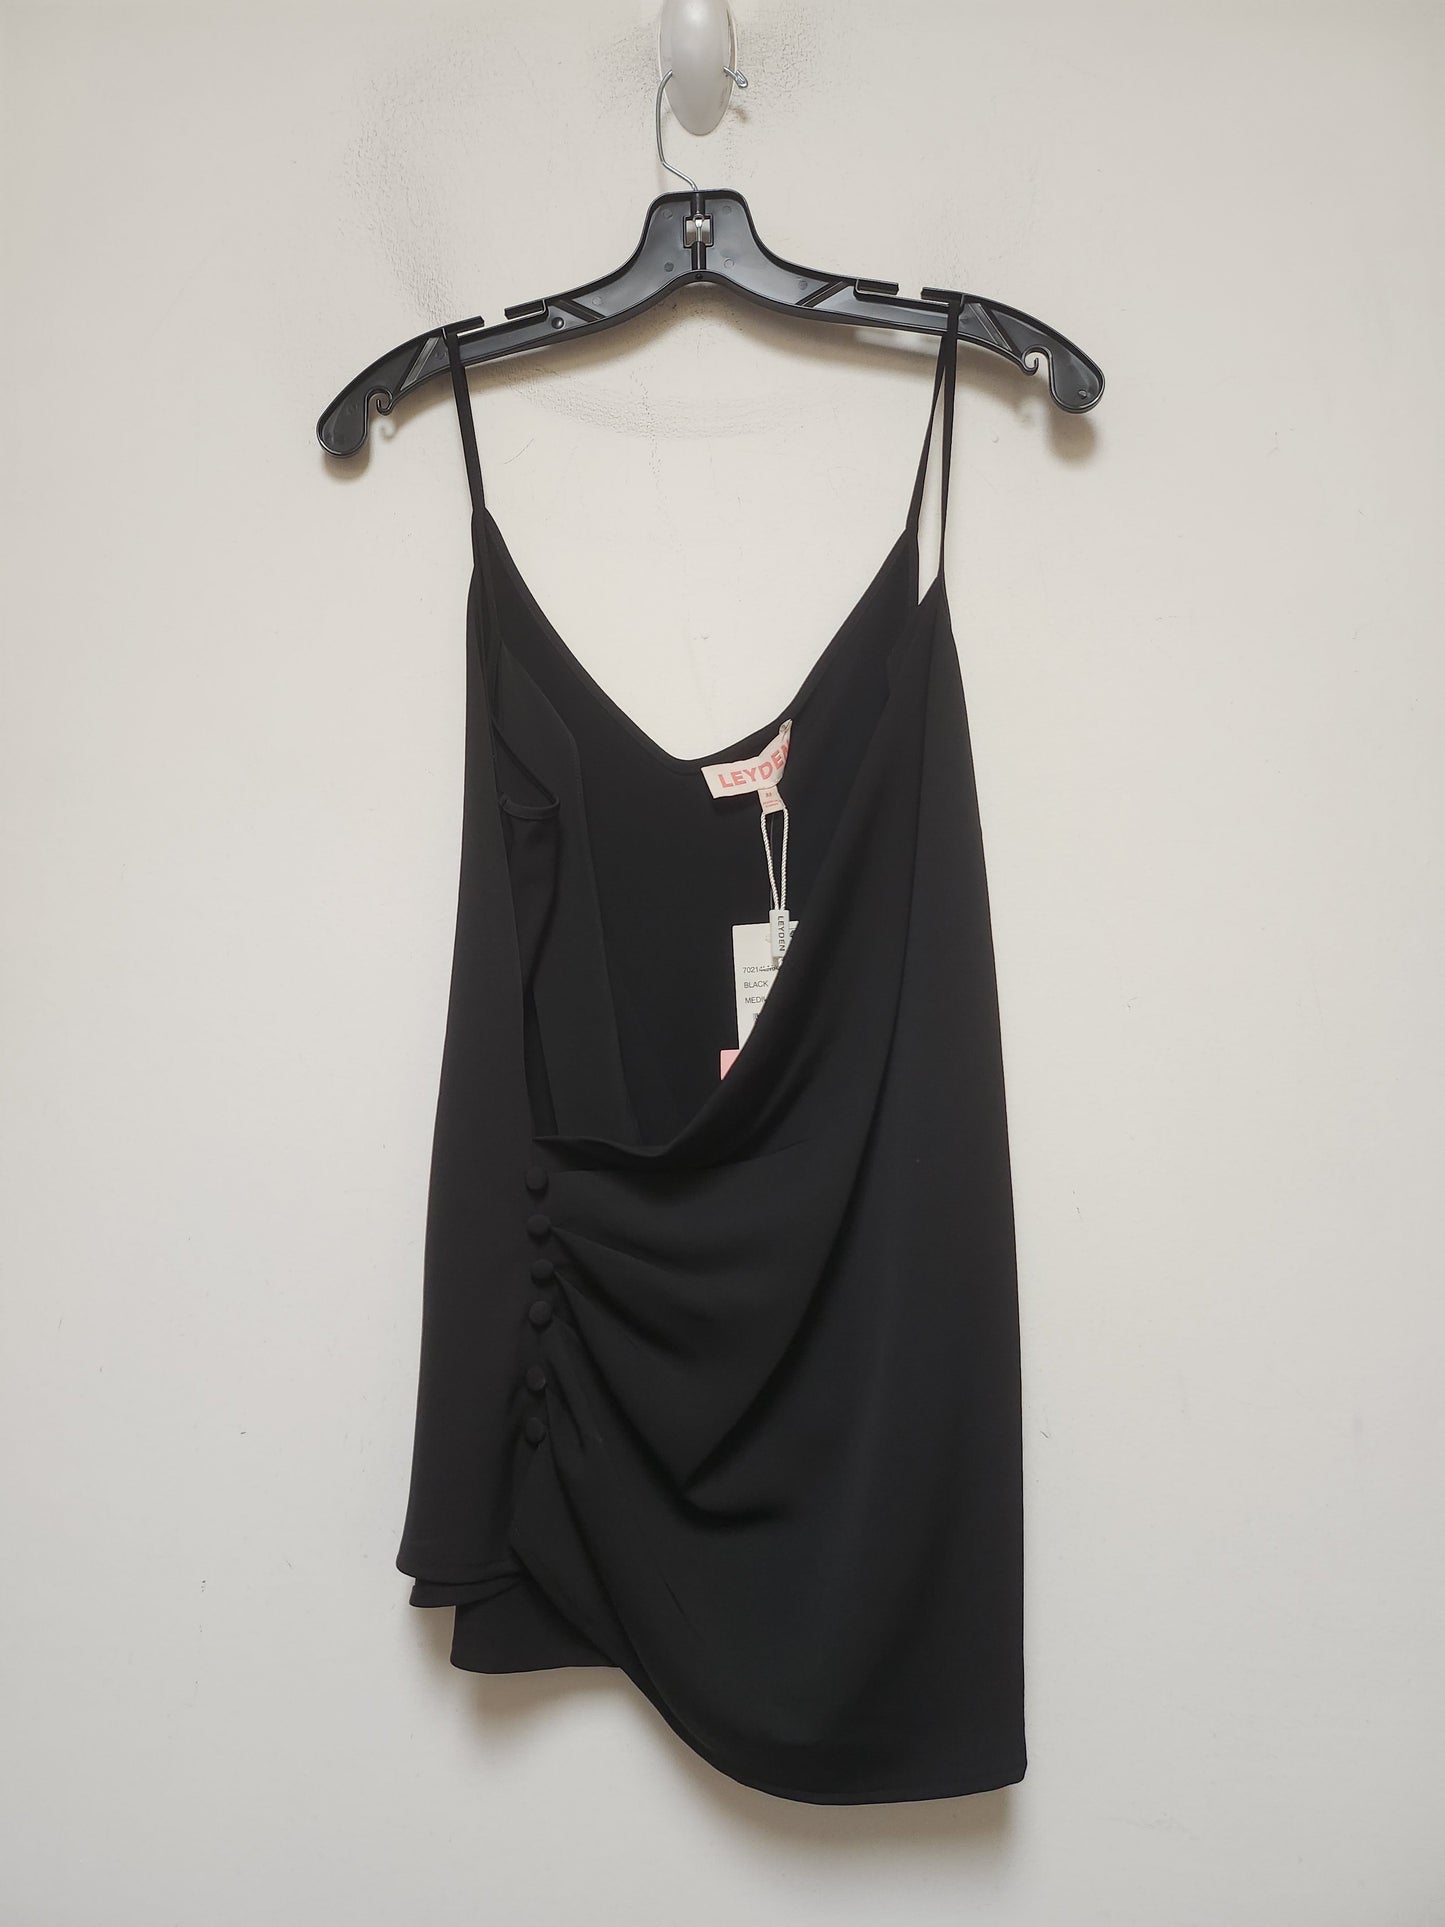 Black Top Sleeveless Clothes Mentor, Size M